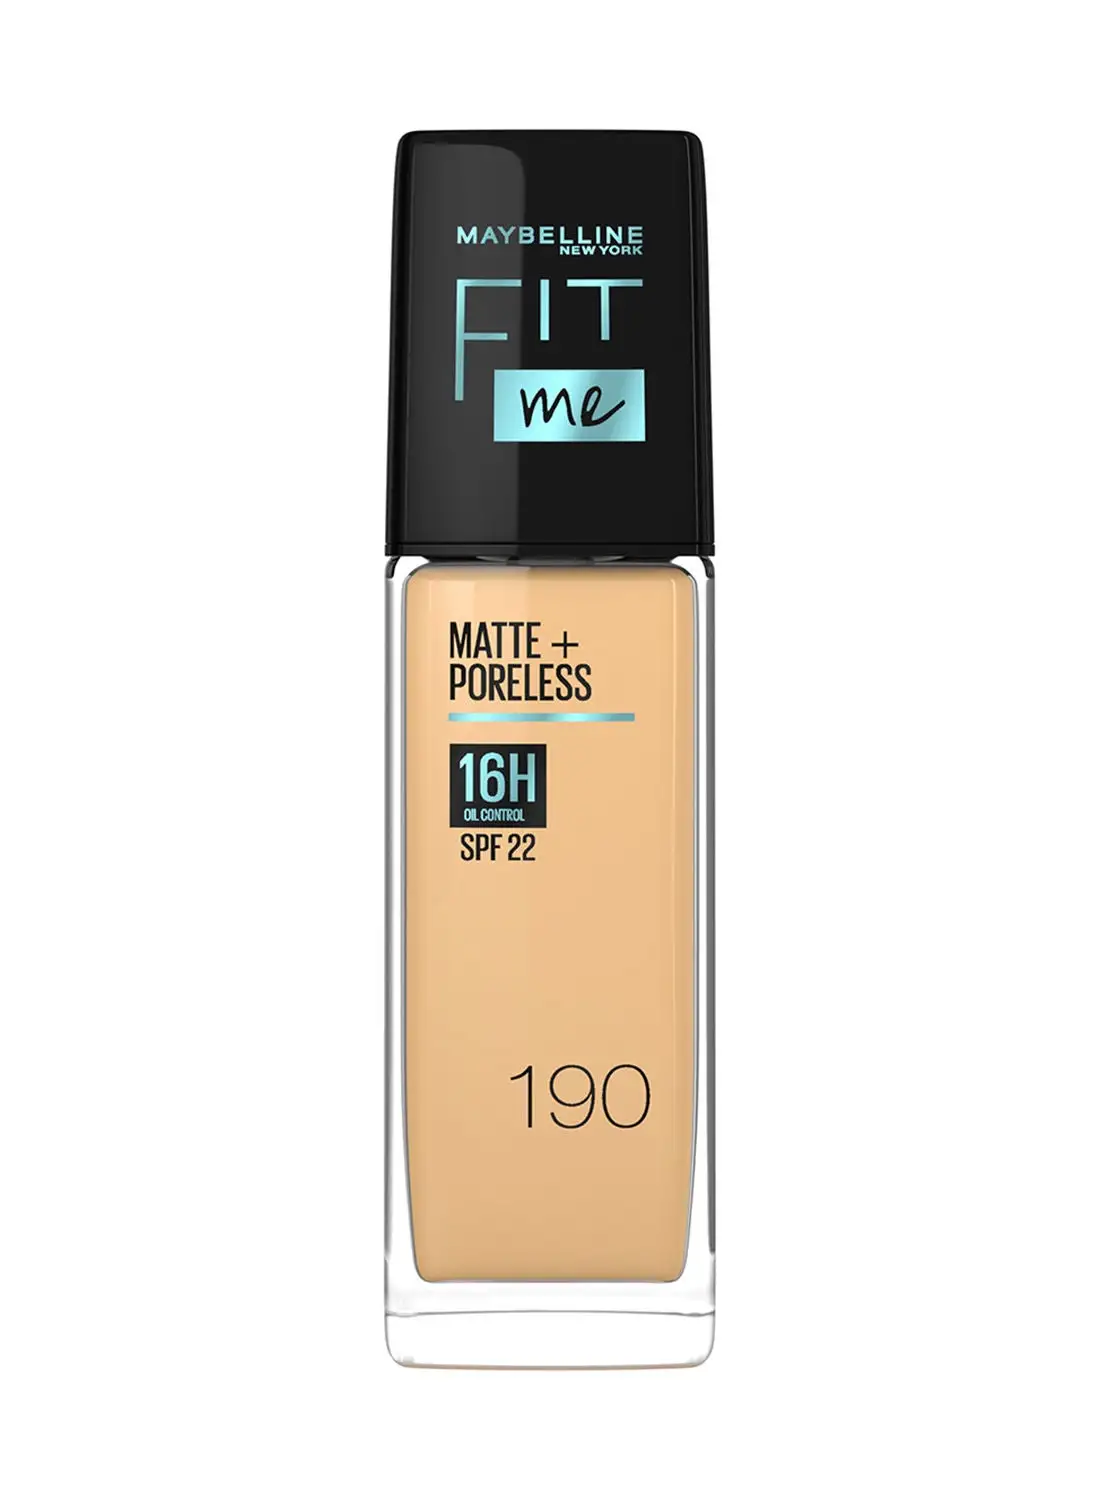 MAYBELLINE NEW YORK Maybelline New York Fit Me Matte & Poreless Foundation 16H Oil Control with SPF 22 - 190